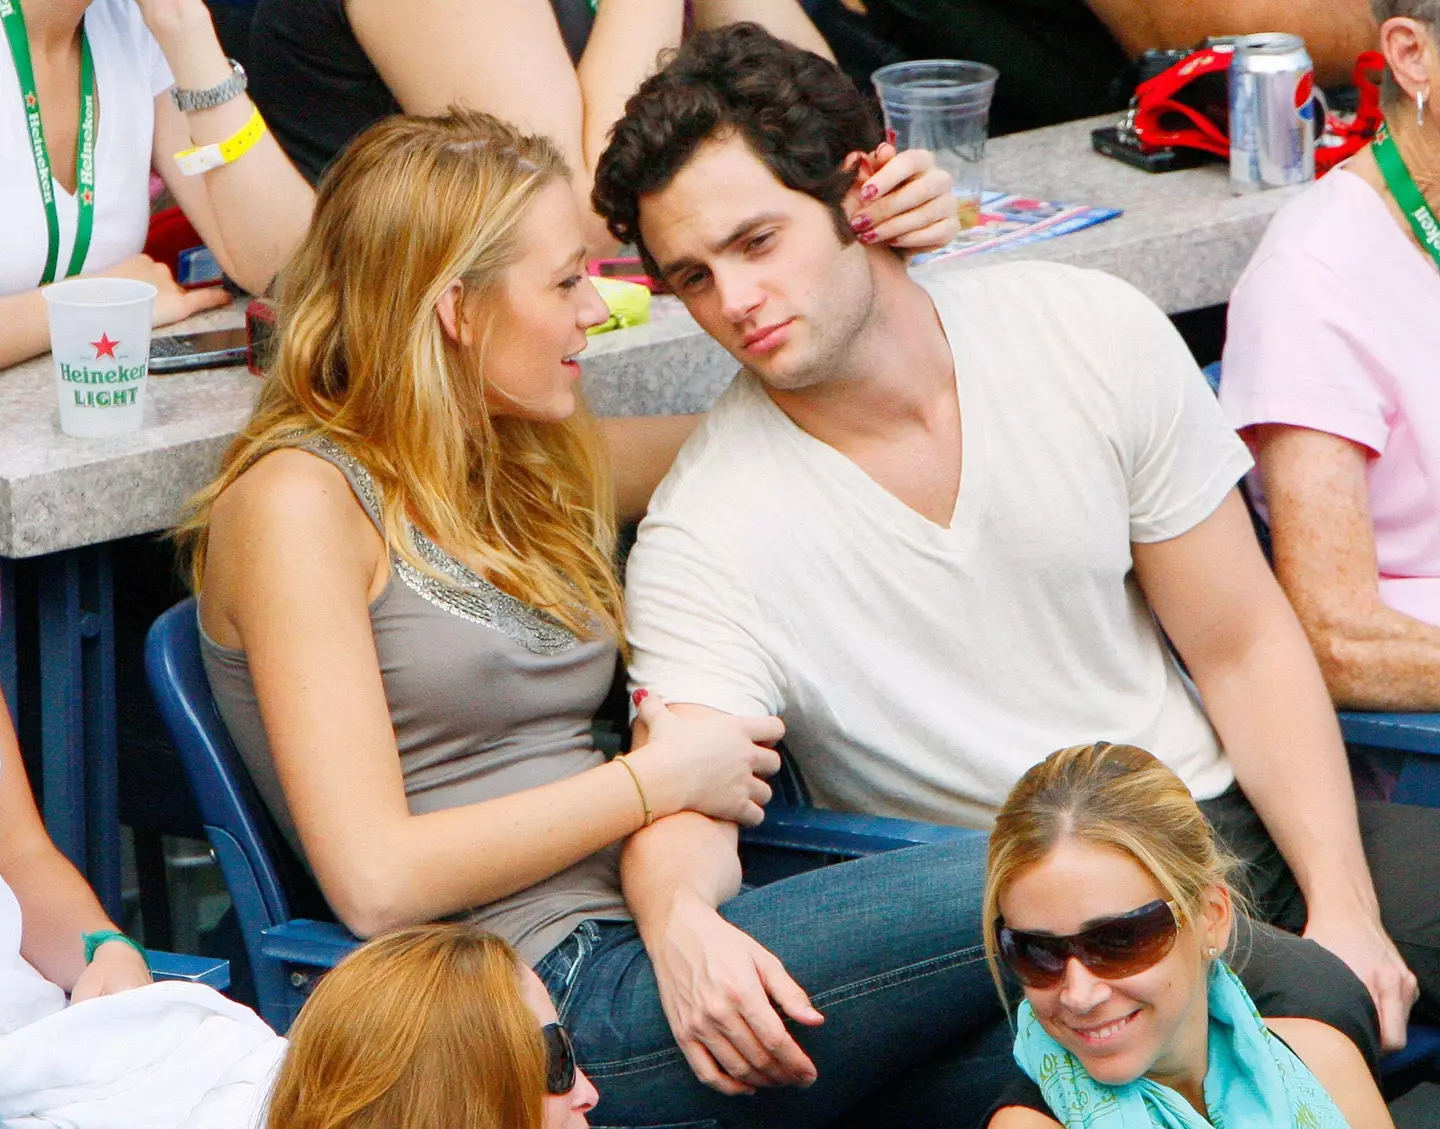 Blake Lively and Penn Badgley in 2009.